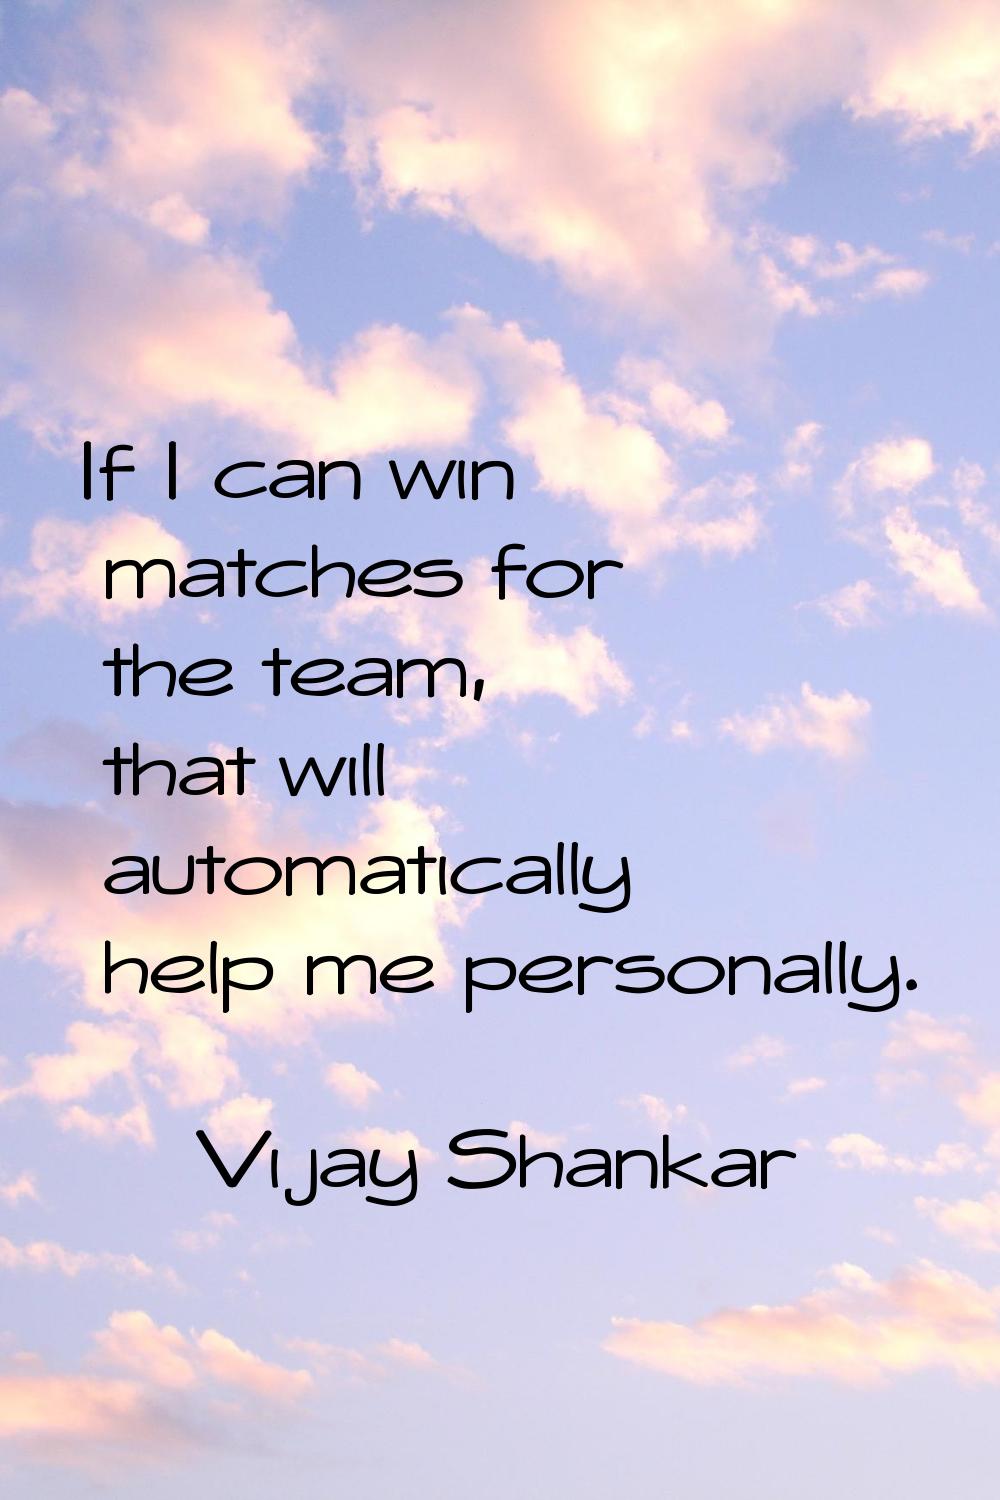 If I can win matches for the team, that will automatically help me personally.